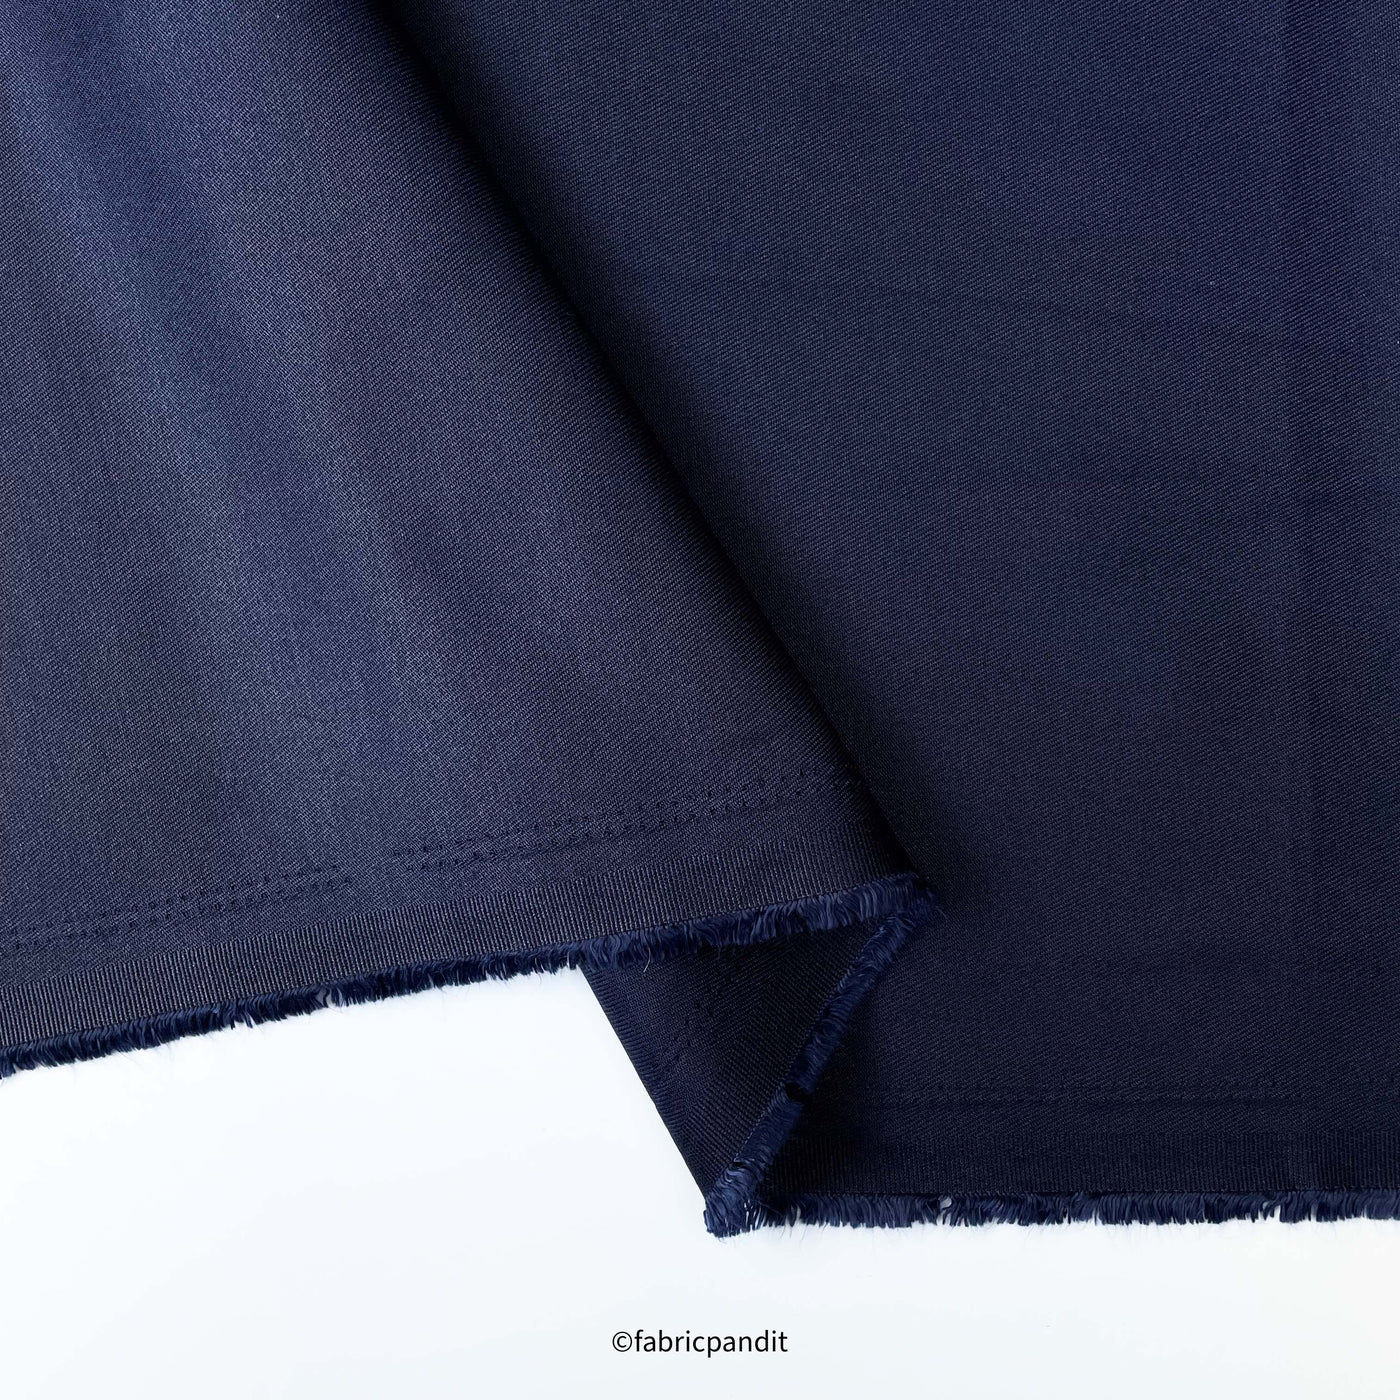 Fabric Pandit Fabric Navy Blue Twill Premium Suiting Fabric (Width 58 Inches)